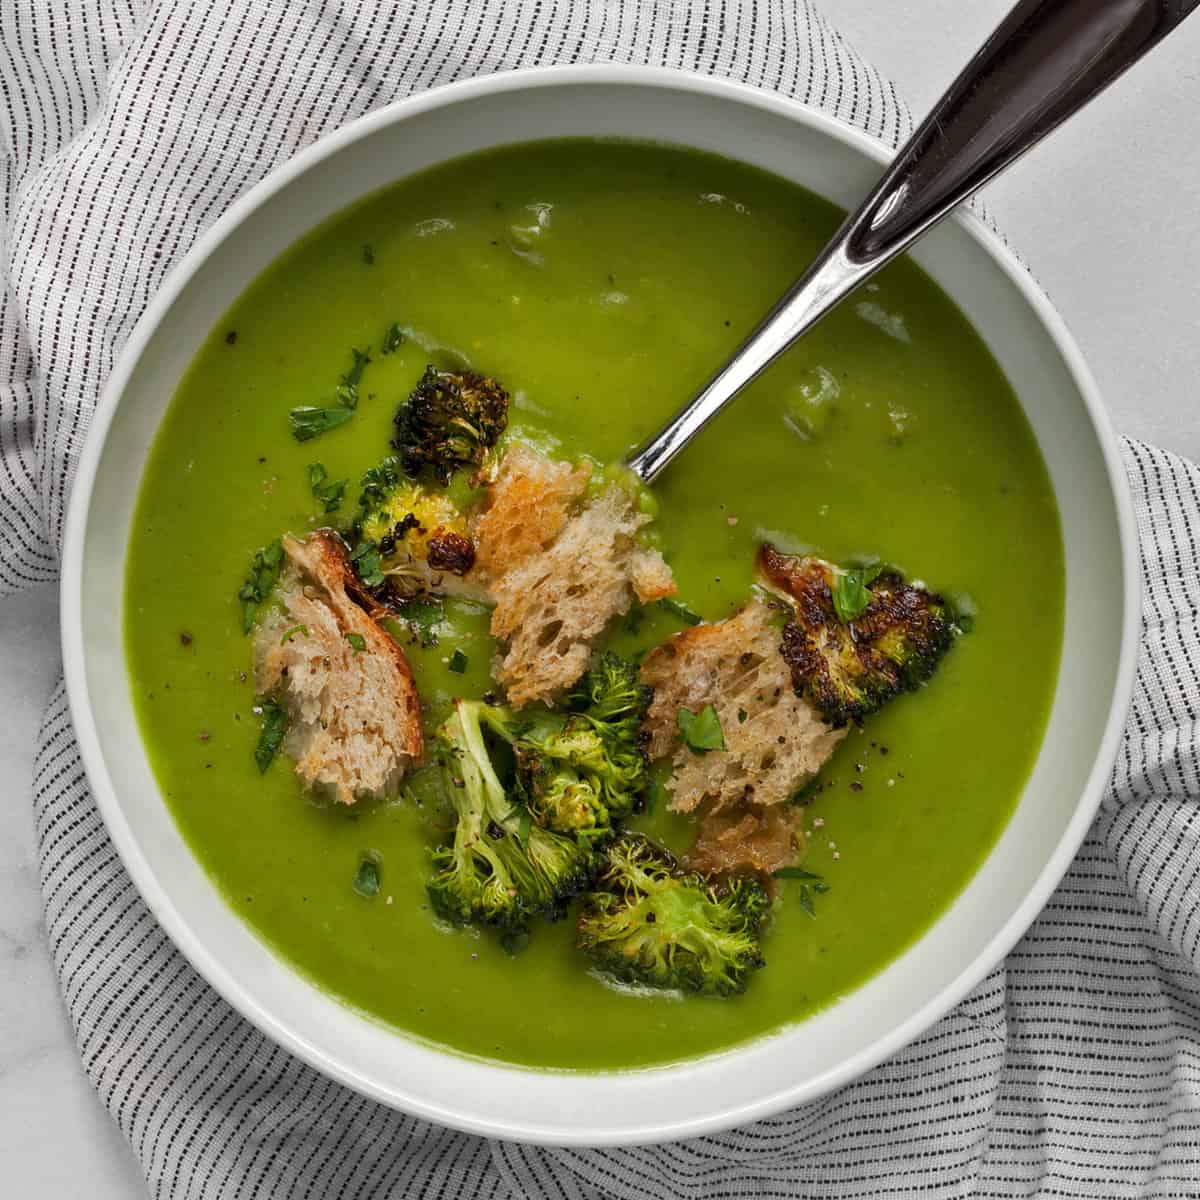 Healthy broccoli soup in a bowl.